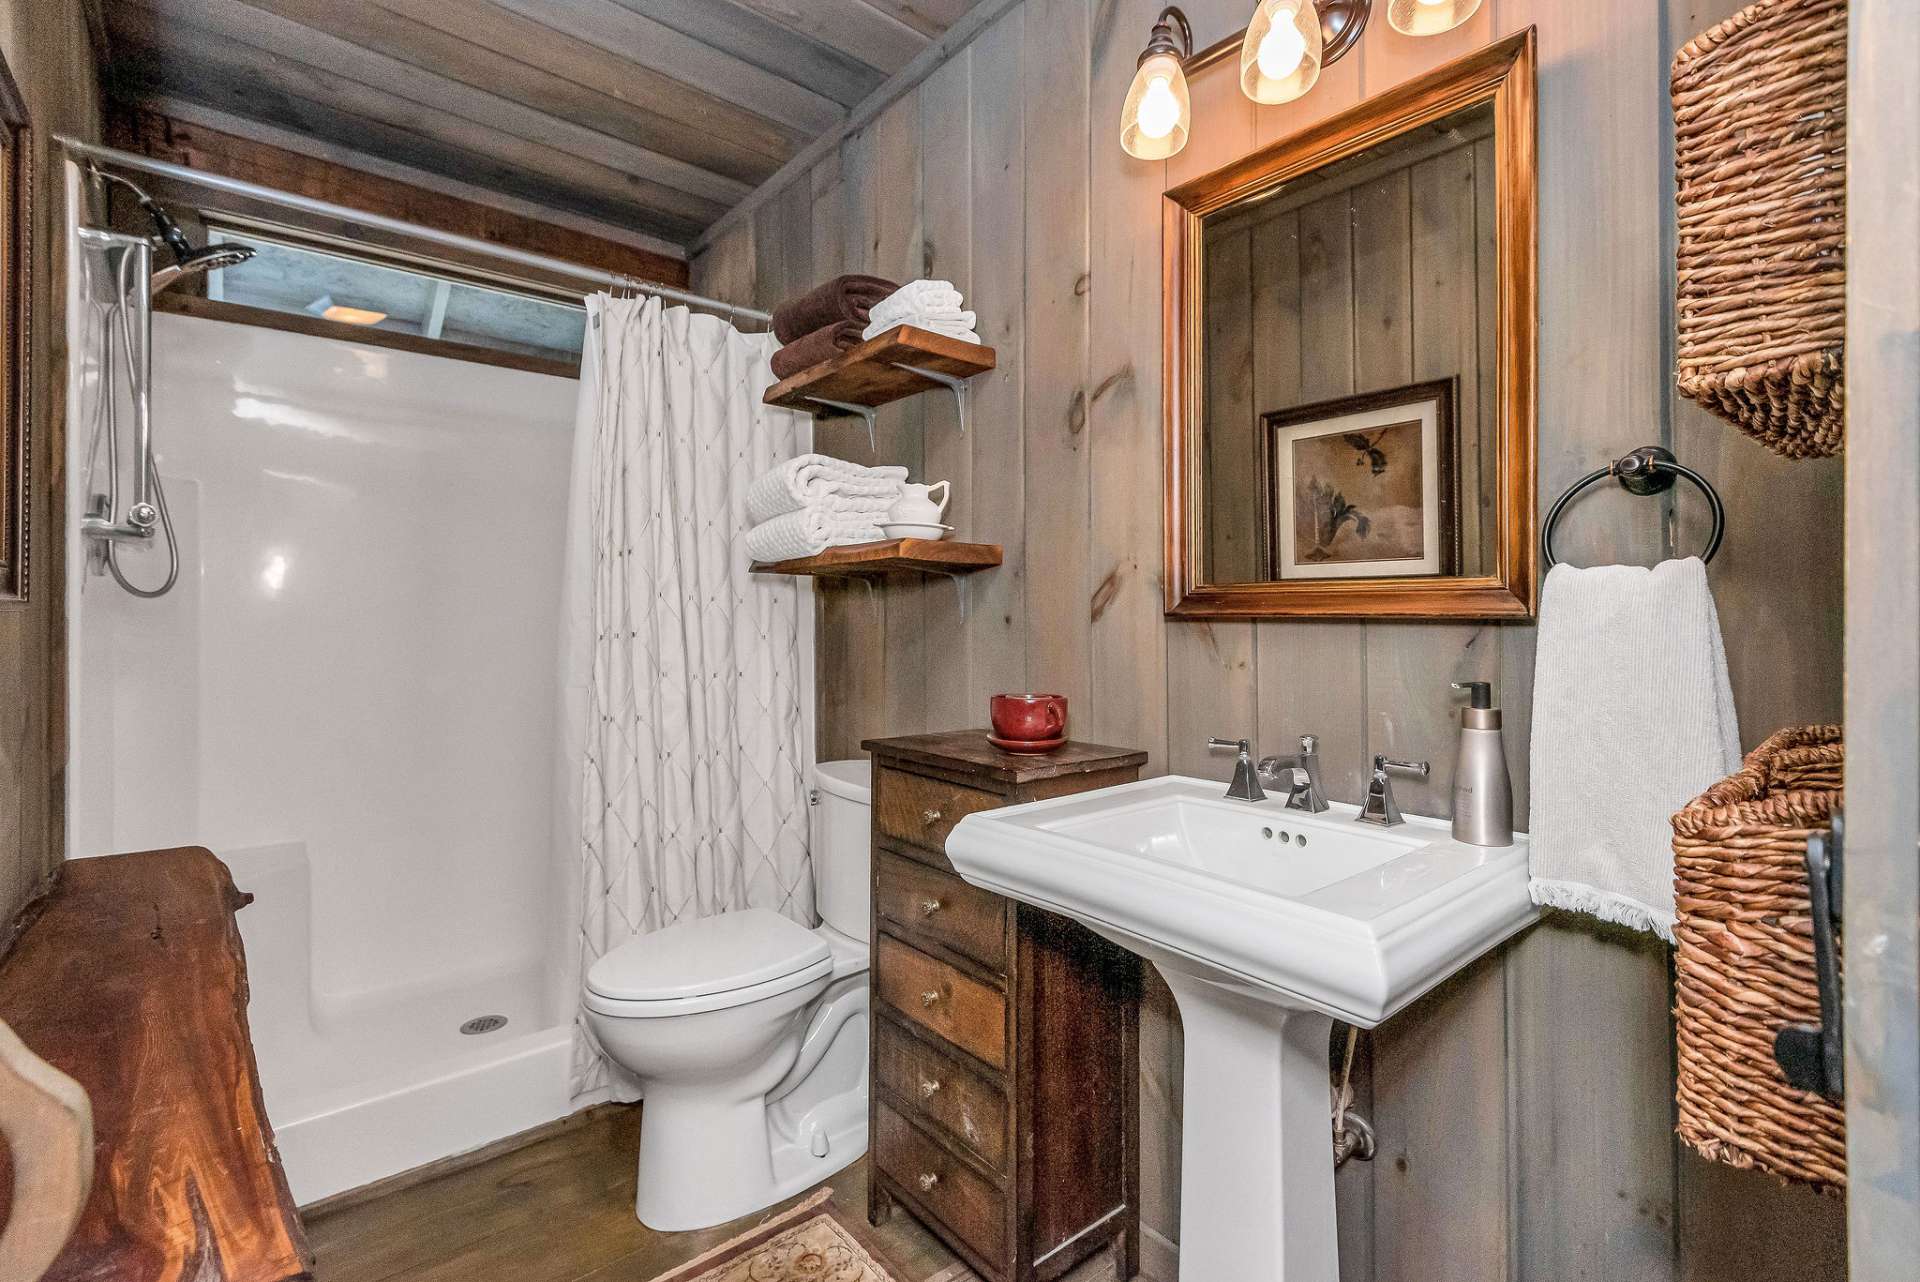 The main level bathroom offers a shower with two seats and a pedestal sink which adds a touch of vintage charm.